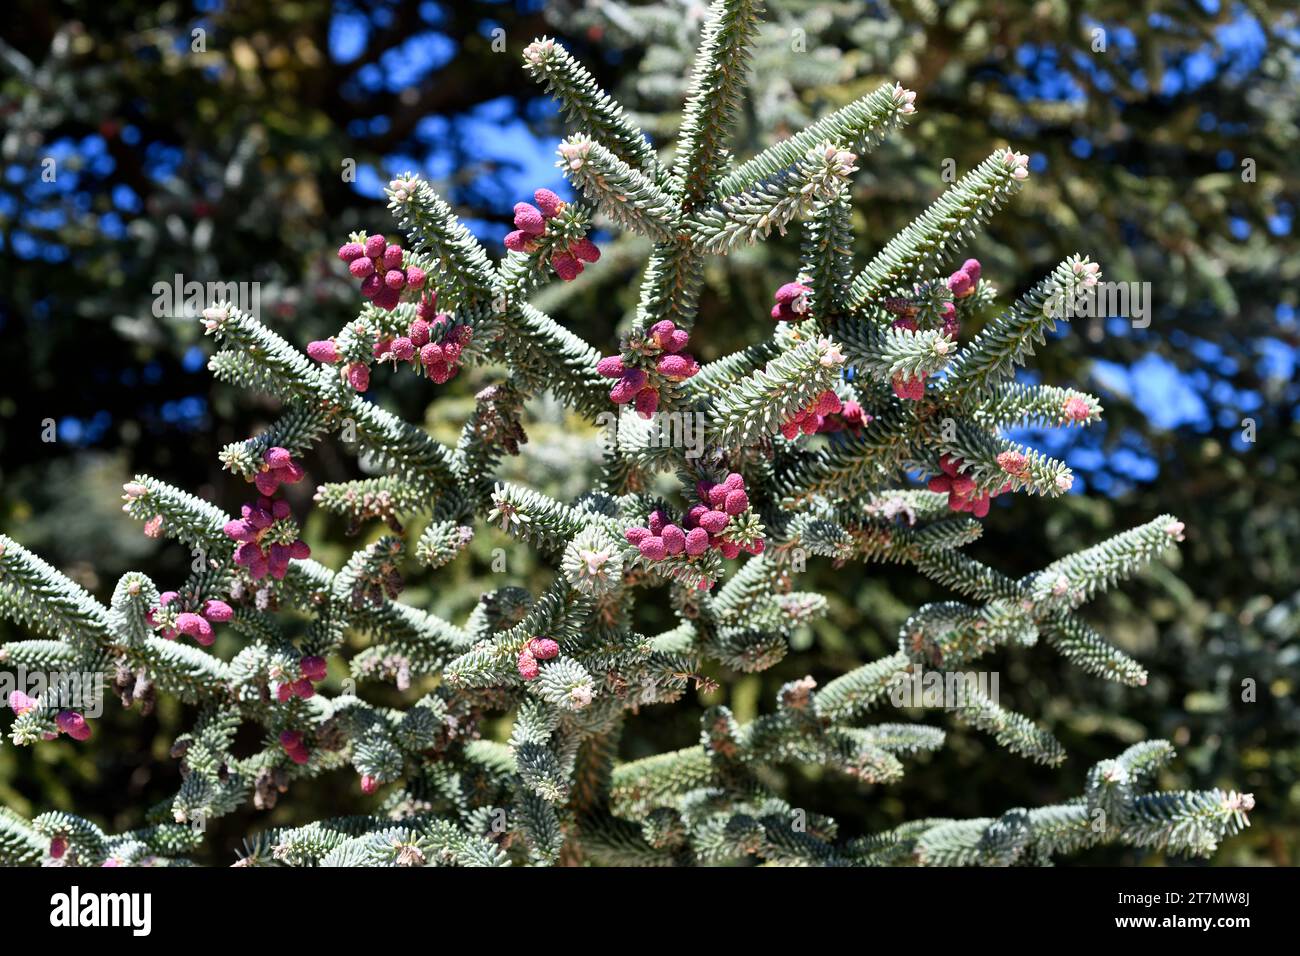 Spanish fir or pinsapo (Abies pinsapo) evergreen tree endemic to Mountains of Cadiz and Malaga. Male cones. This photo was taken in Los Lajares, Sierr Stock Photo